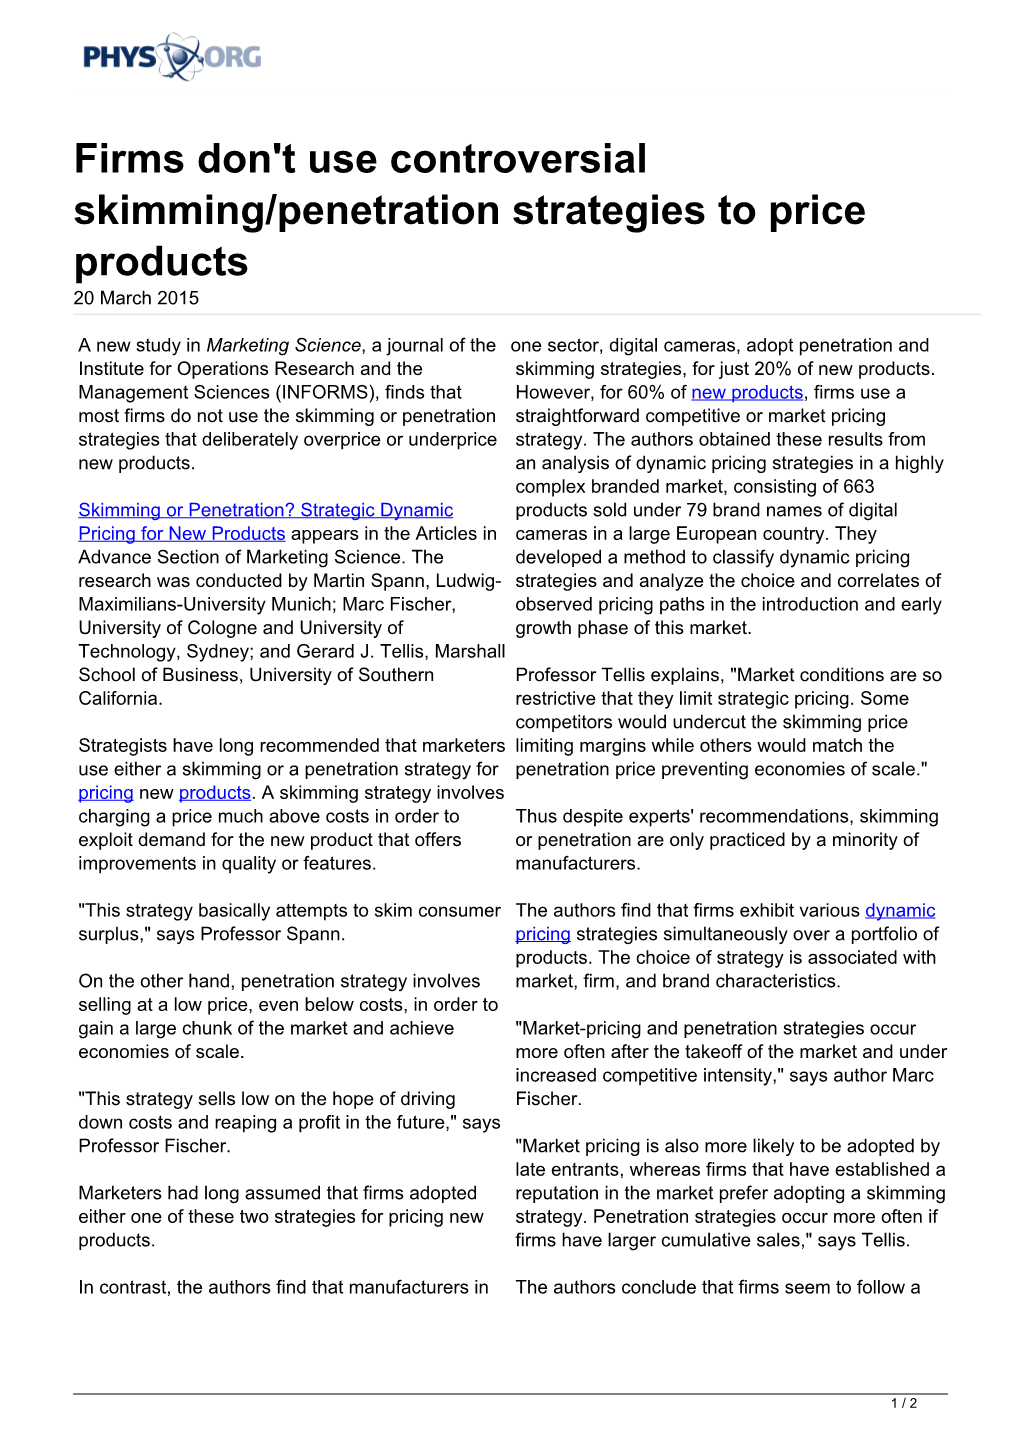 Firms Don't Use Controversial Skimming/Penetration Strategies to Price Products 20 March 2015